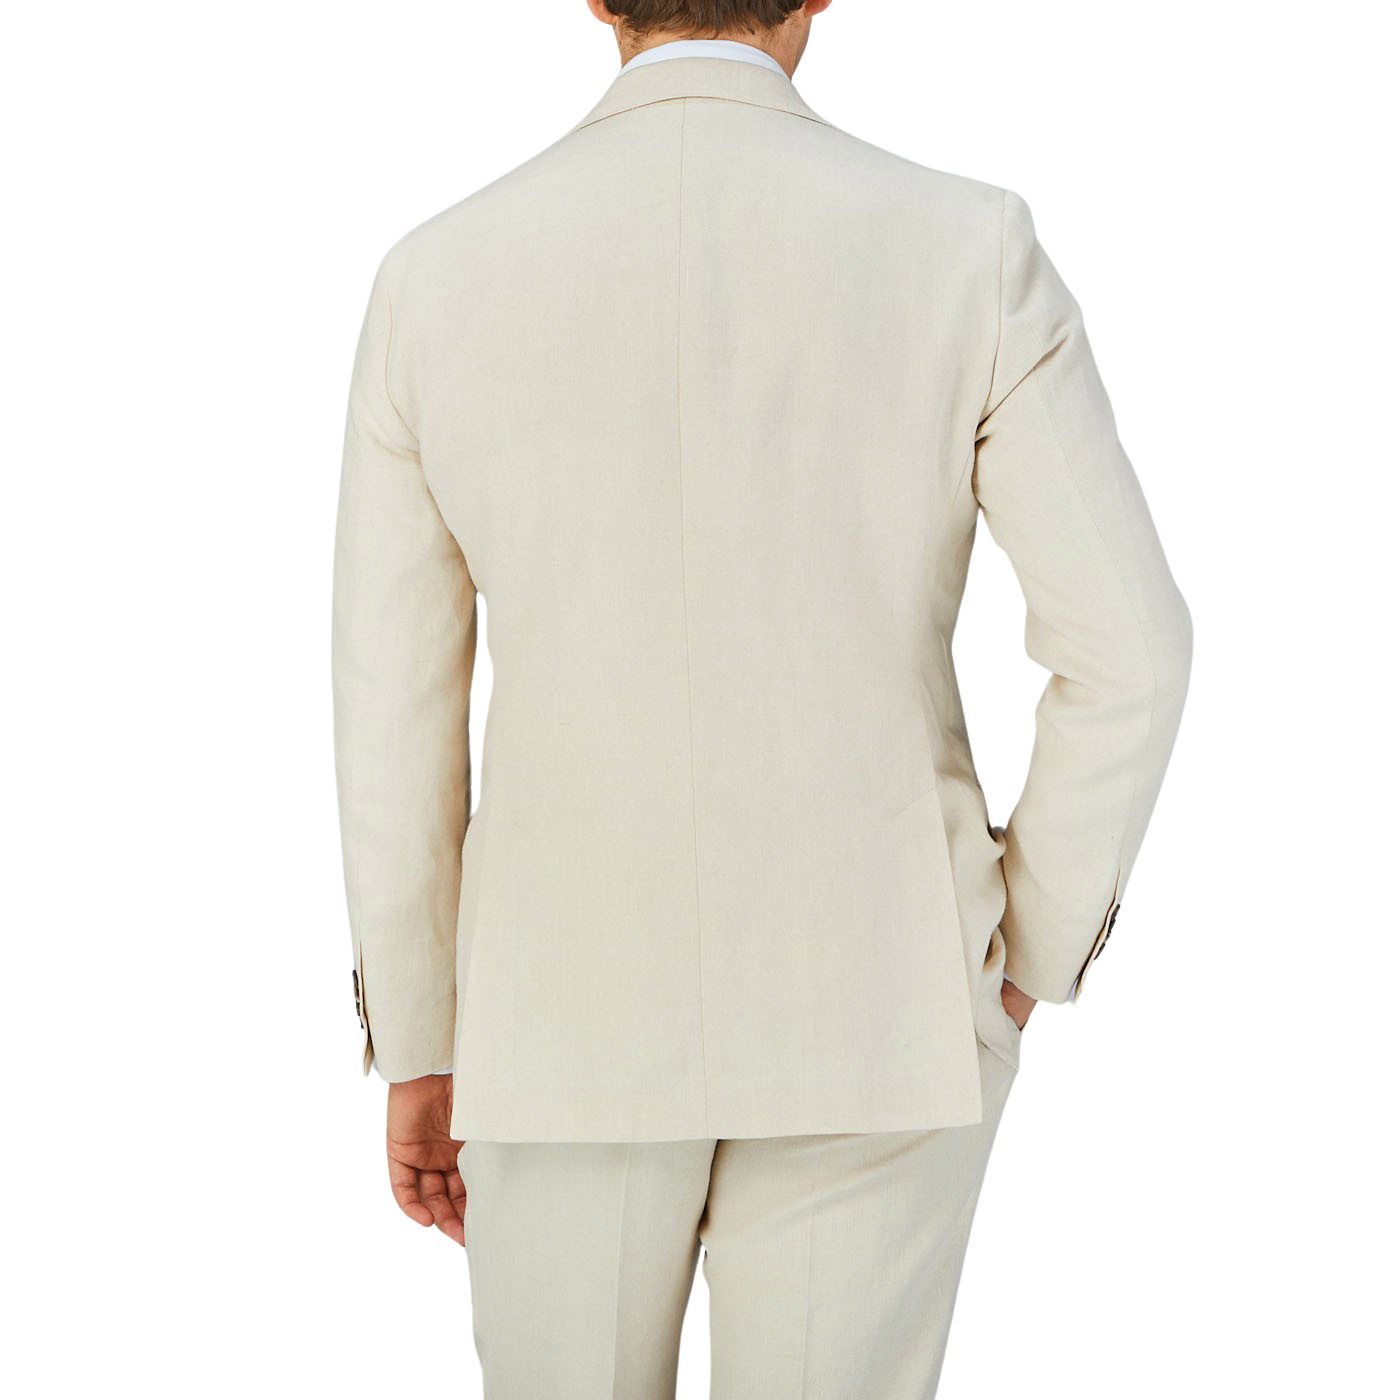 The back view of a man wearing a Baltzar Sartorial Light Beige Pure Linen Suit Jacket and linen fabric trousers.